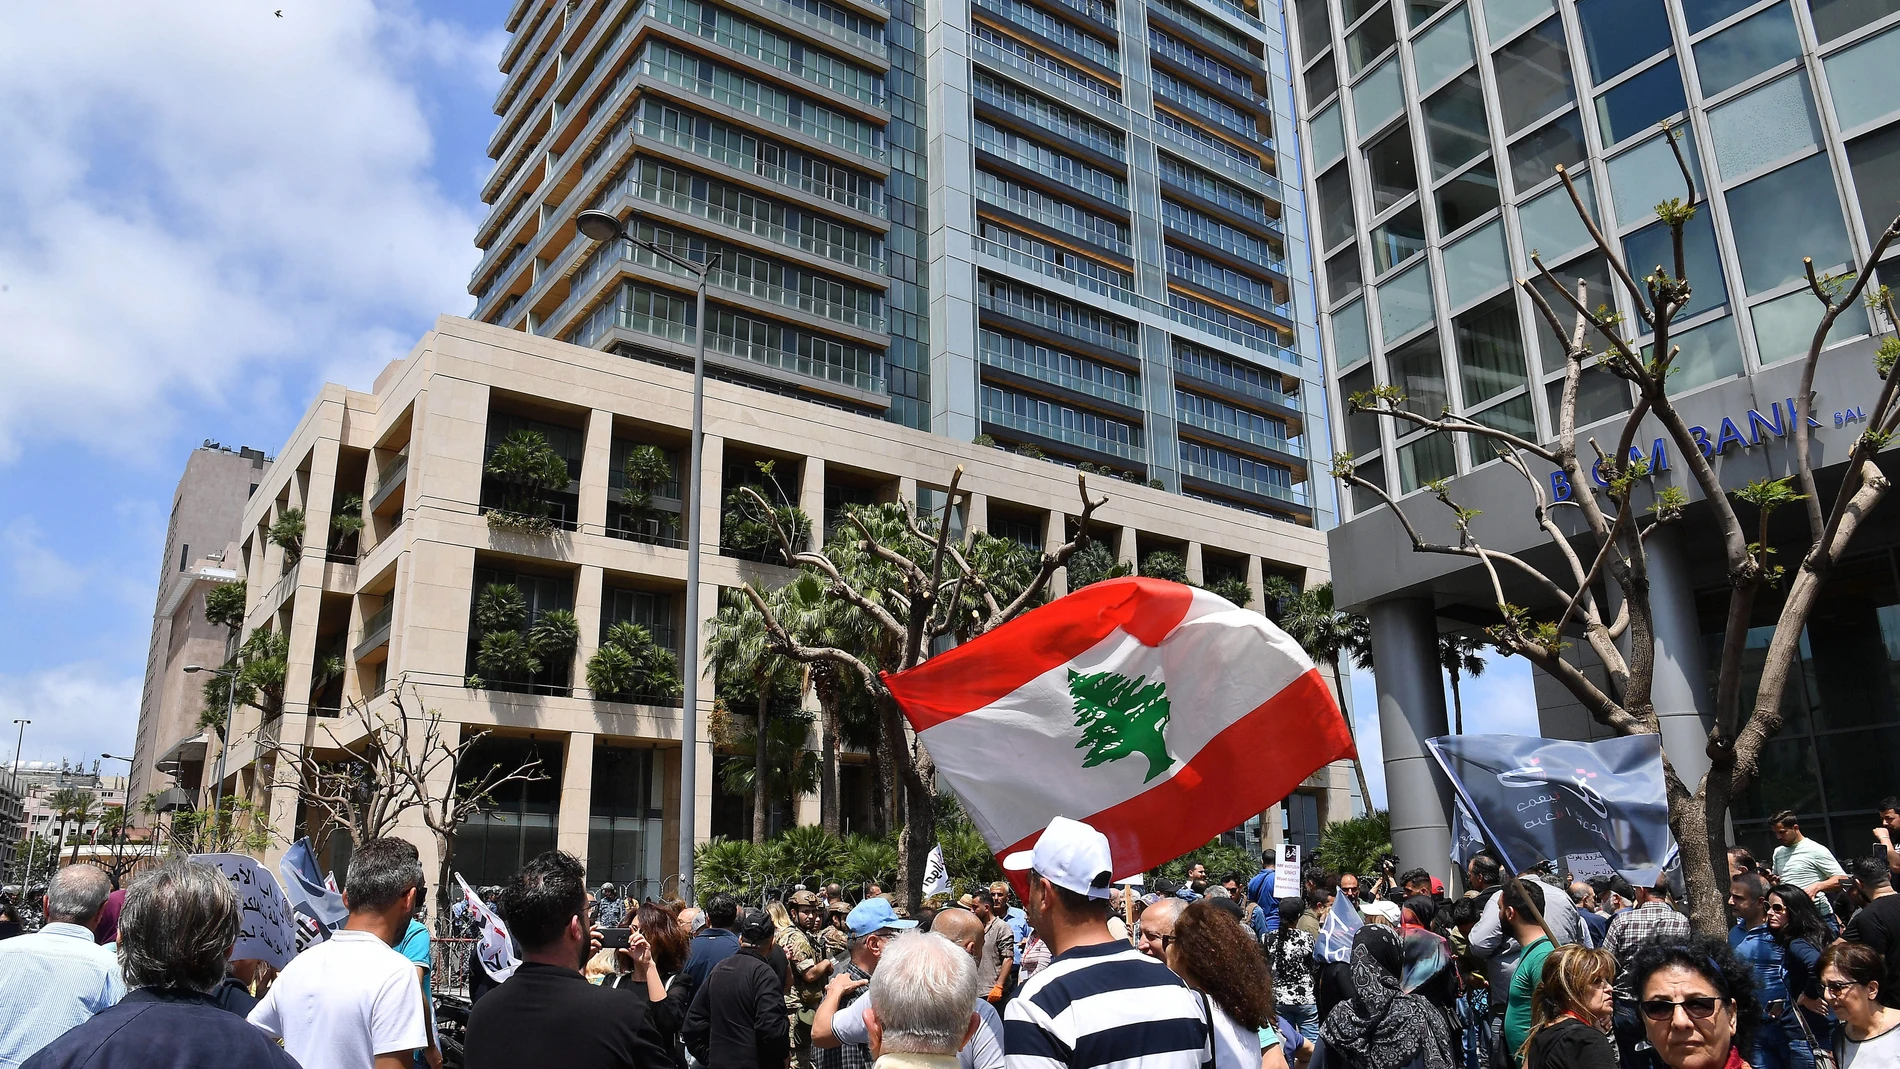 Beirut (Lebanon), 09/05/2023.- Lebanese Bank customers carry the national flag during a protest against the monetary policies organized by Depositors' Outcry, a group campaigning for the rights of depositors, outside of the cracker Prime minister Najib Mikati's residence in Beirut, Lebanon, 09 May 2023. Bank customers demand they be allowed to withdraw their savings, which have been blocked as a result of the ongoing economic crisis in the country, as the Lebanese pound has lost about 95 percent of its value against the US dollar. (Protestas, Líbano) EFE/EPA/WAEL HAMZEH 